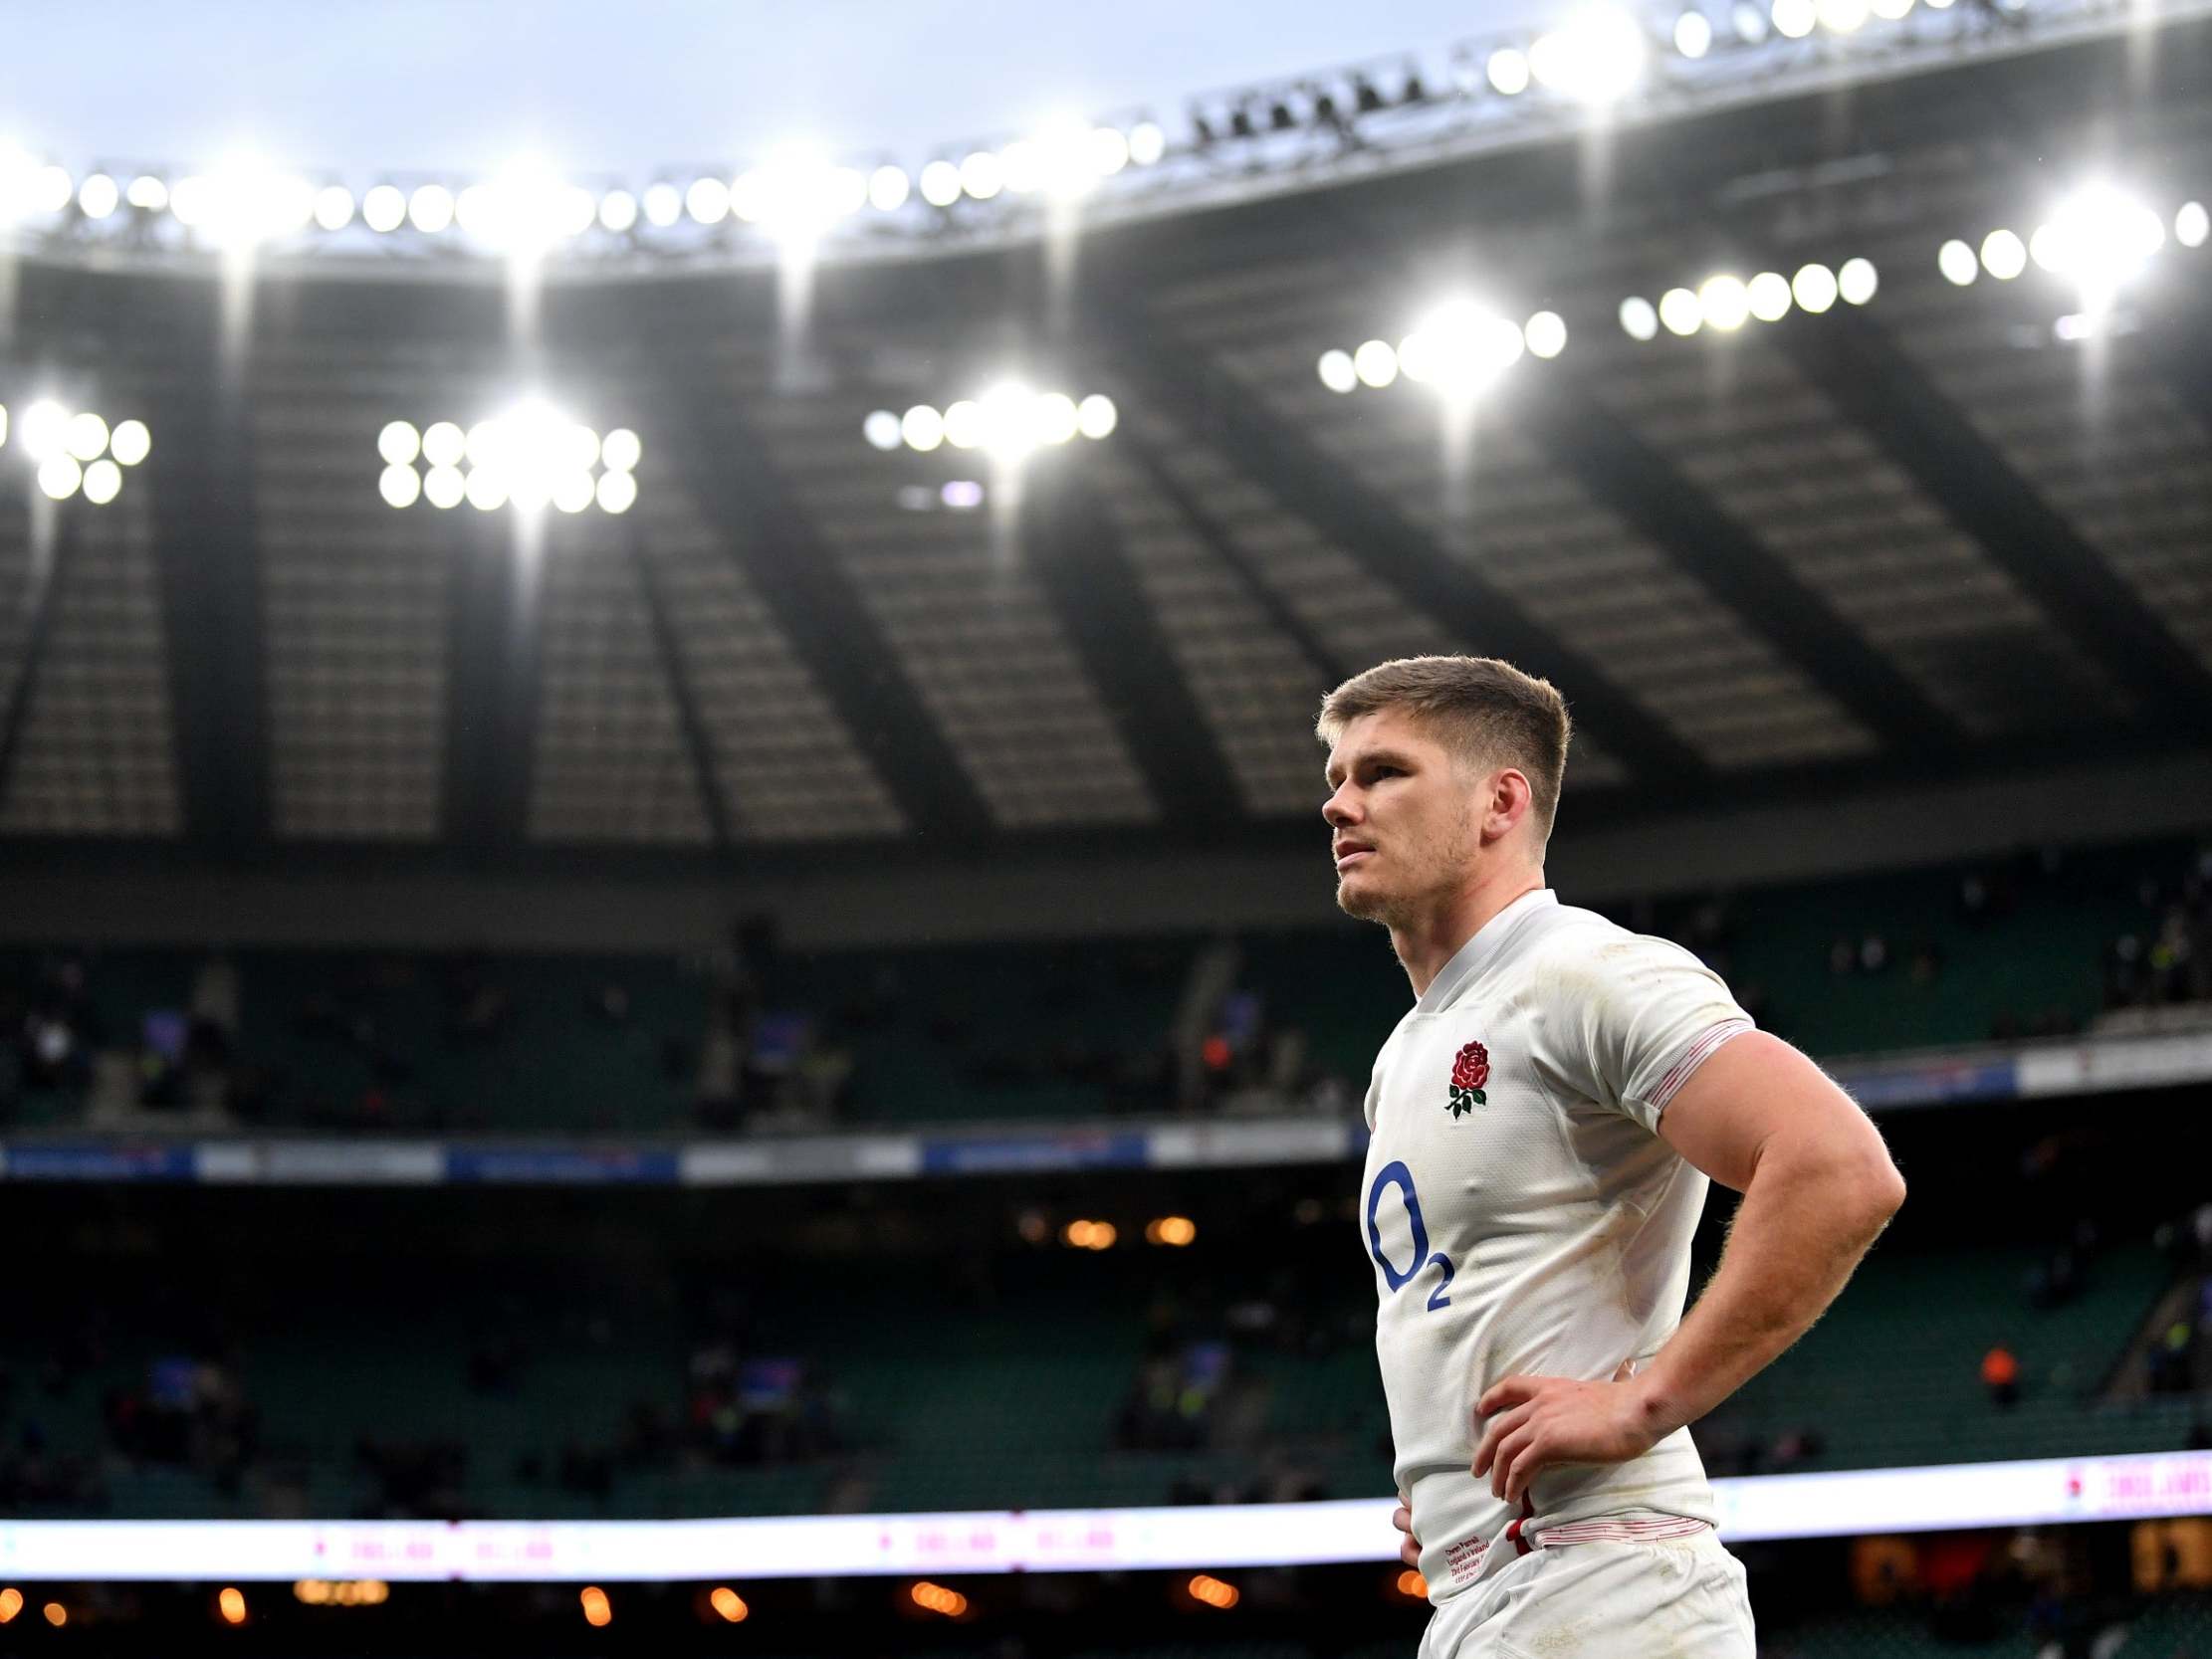 England are favourites to win the delayed Six Nations championship